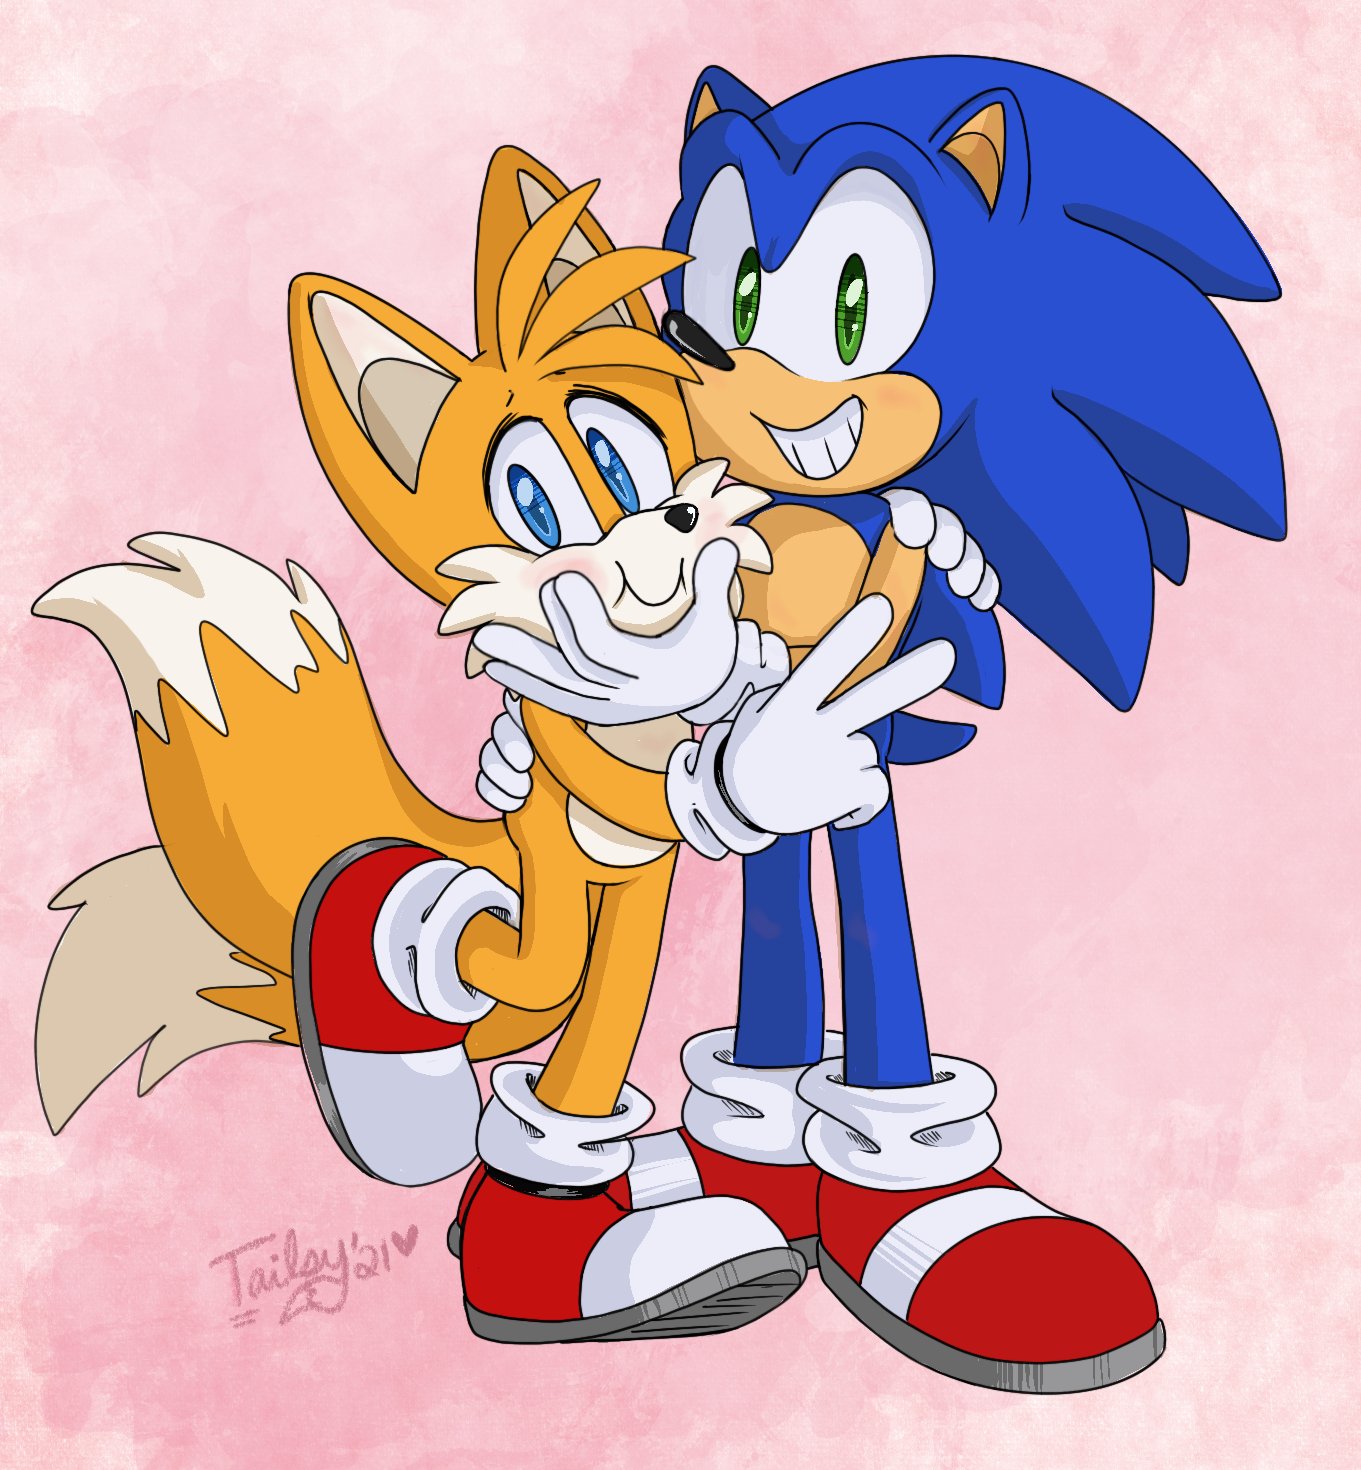 X 上的MugiMikey  Commissions Closed!：「My fanart submission of Super Sonic  and Super Tails for @TheEmuEmi's Sonic & Tails R series!   / X